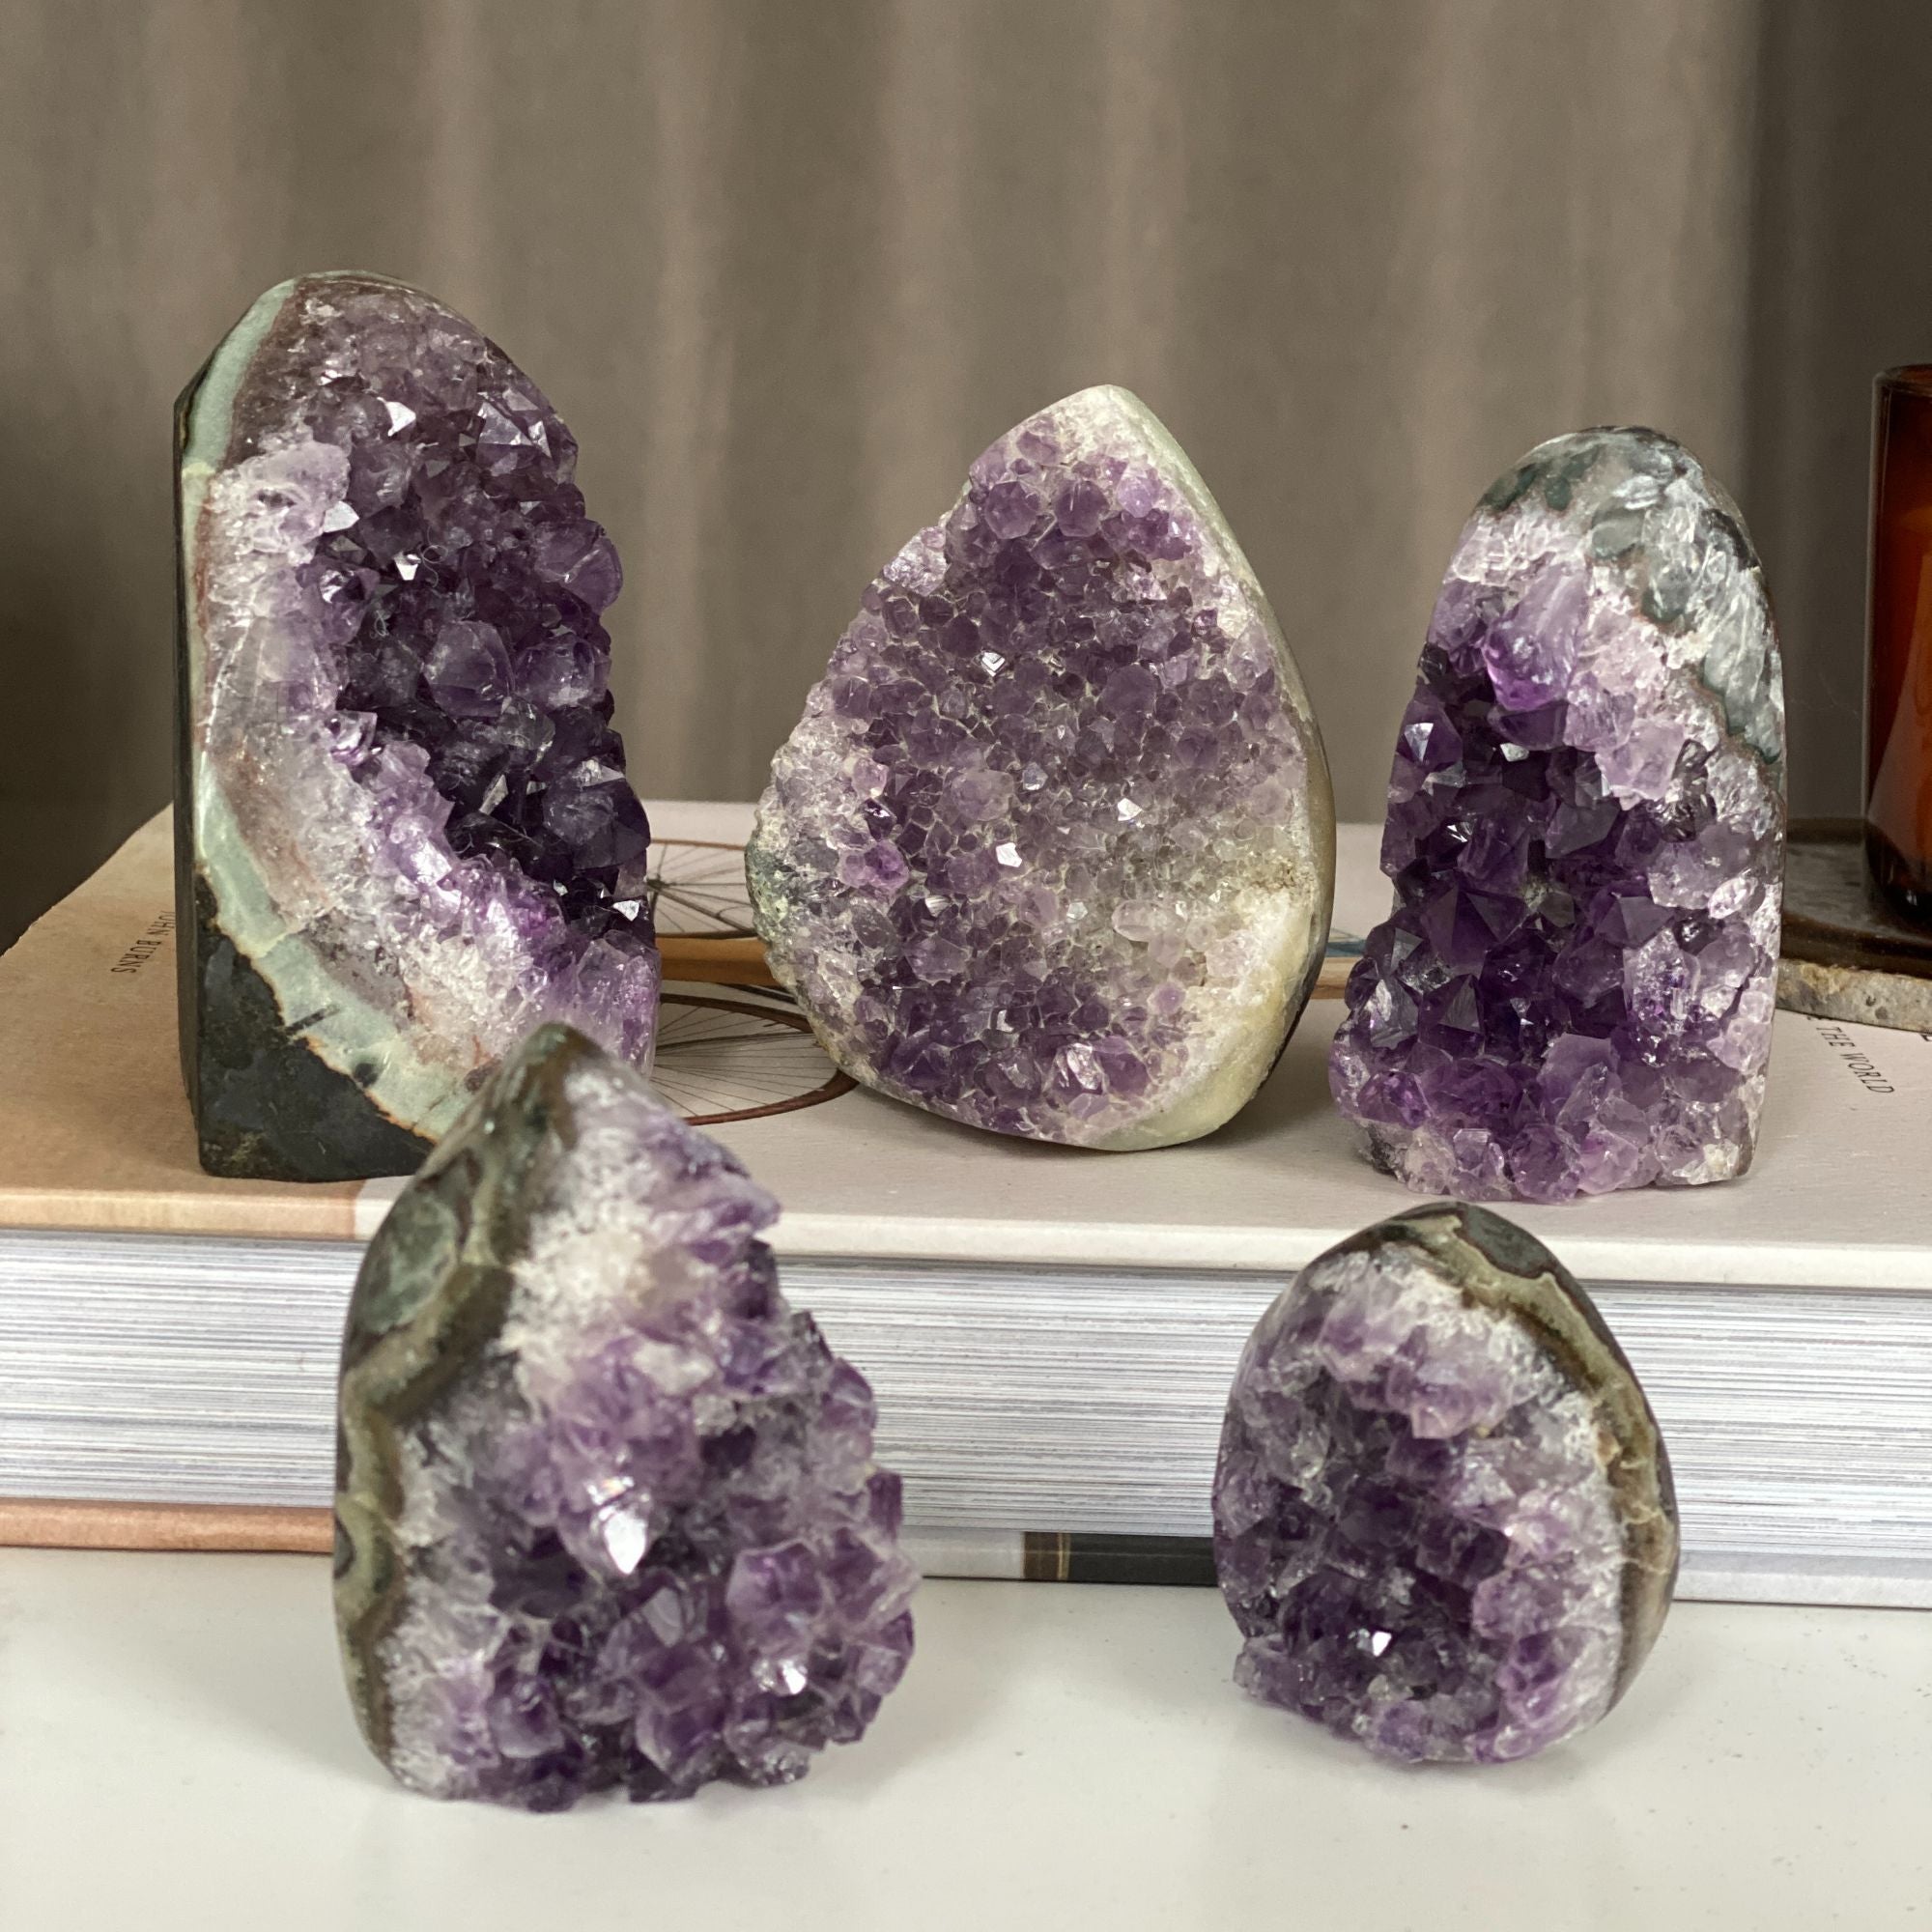 5 pieces lot Amethyst Crystals, Small Amethysts SET, polished crystals with agate layers at edges